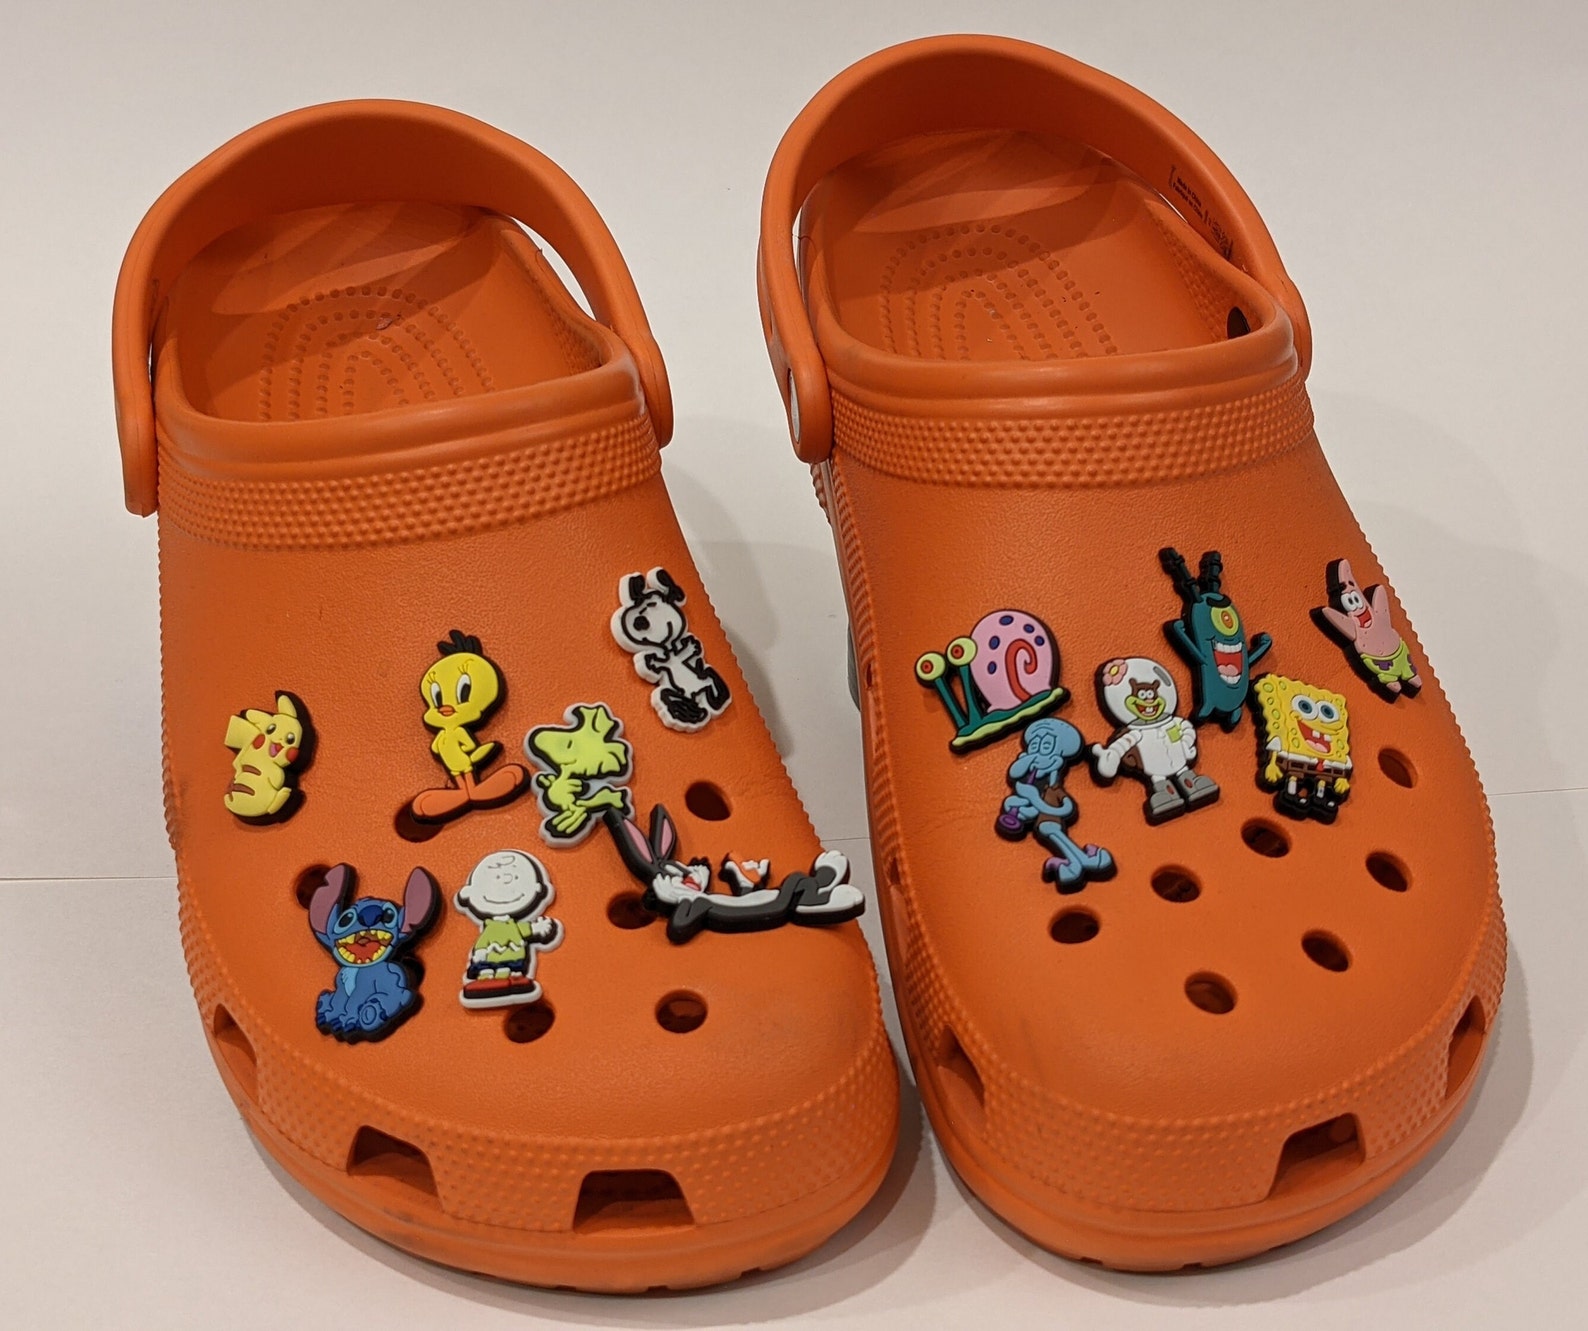 Croc Clog Shoe Charms Animated / Cartoon Characters - Etsy